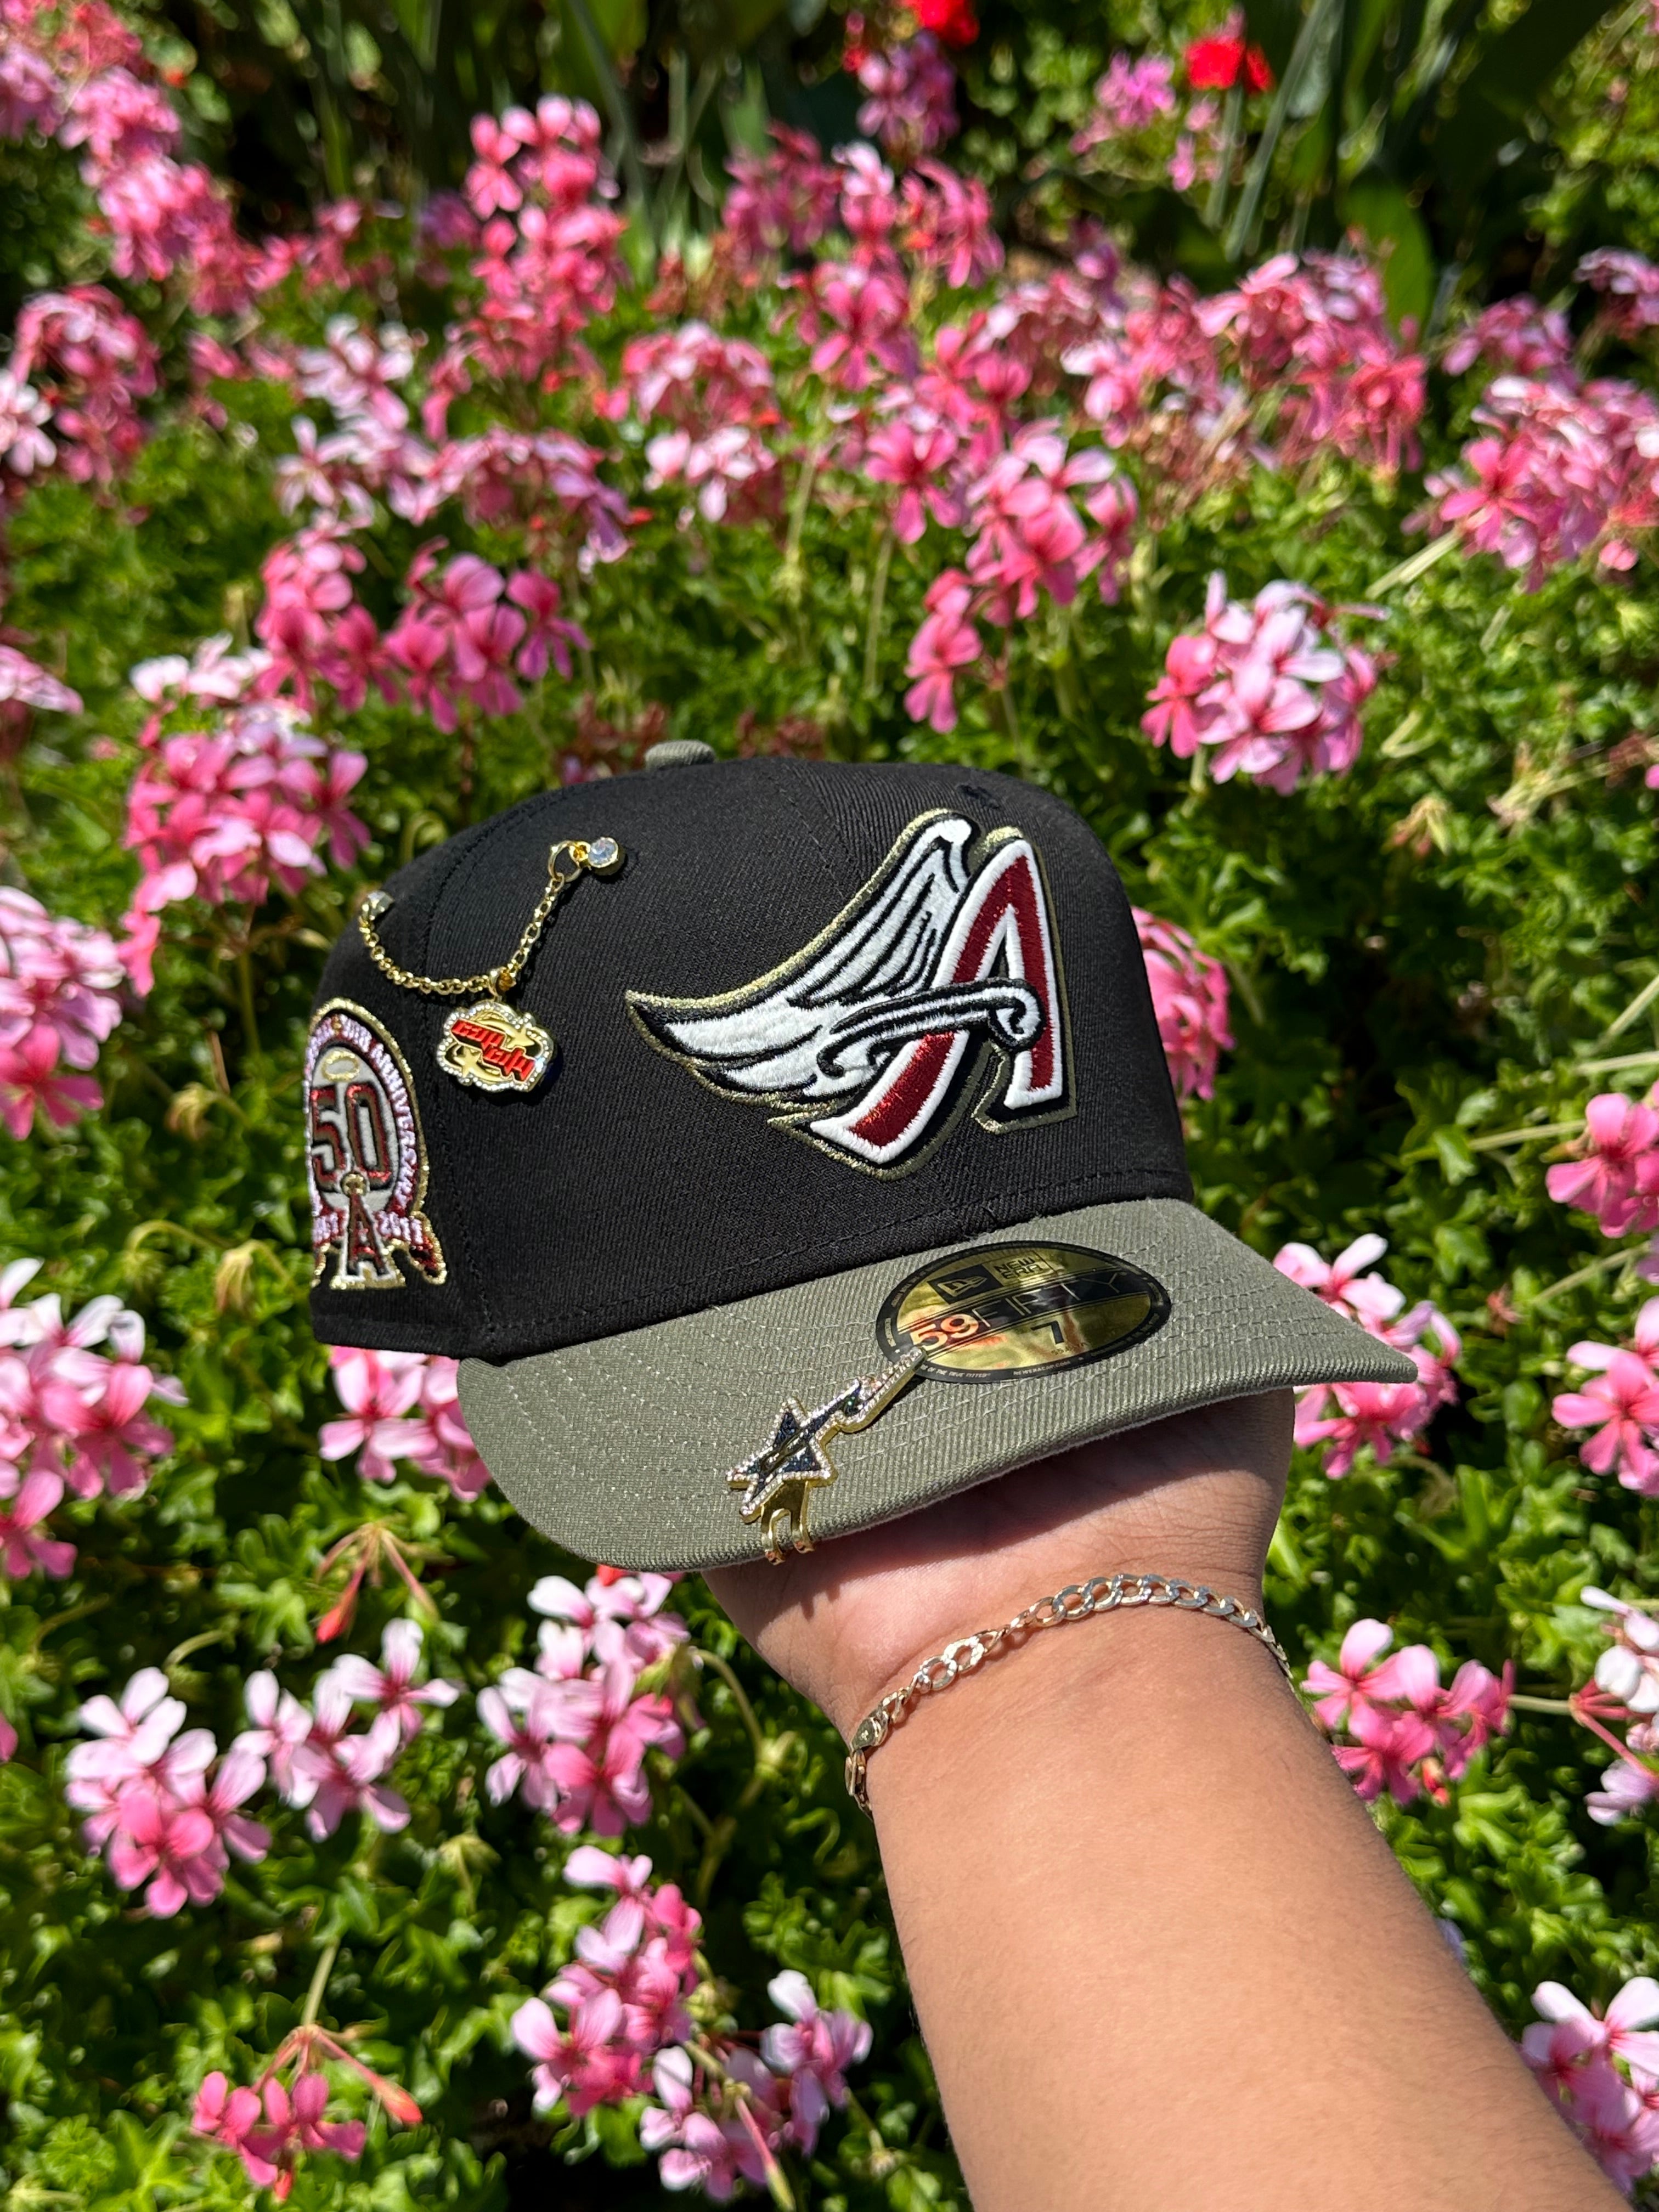 NEW ERA EXCLUSIVE 59FIFTY BLACK/OLIVE ANAHEIM ANGELS W/ 50TH ANNIVERSARY SIDEPATCH